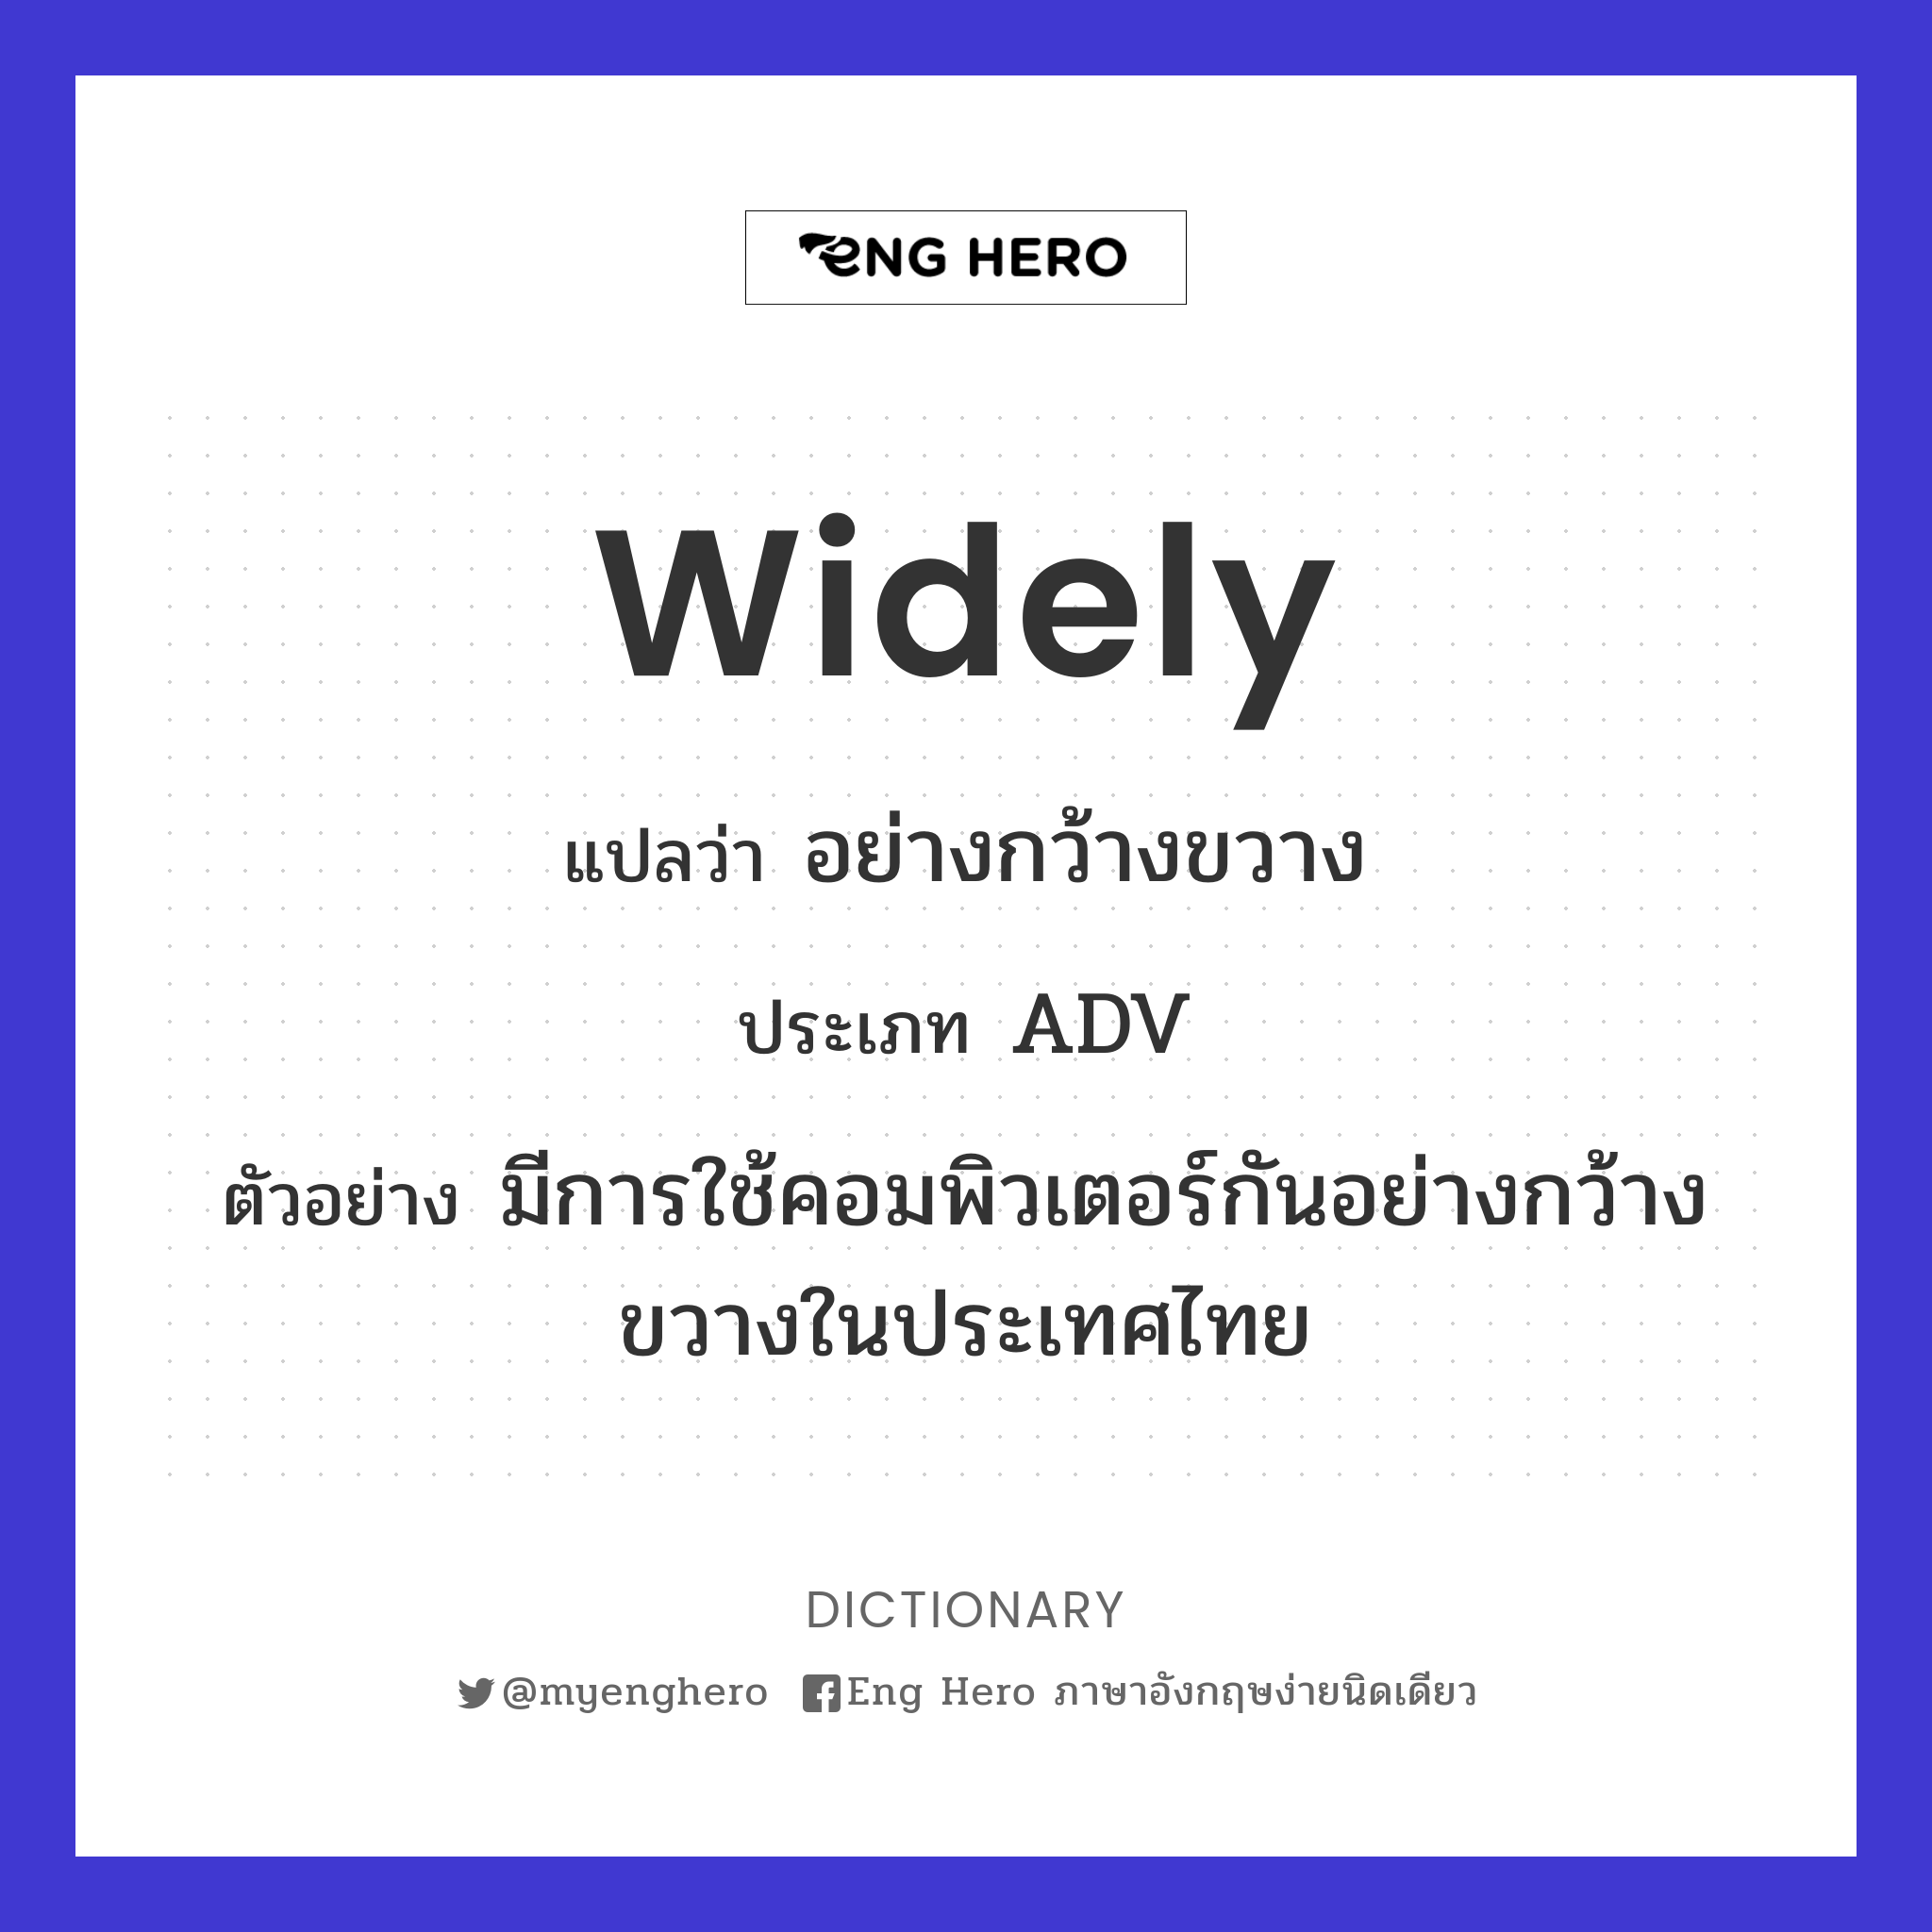 widely